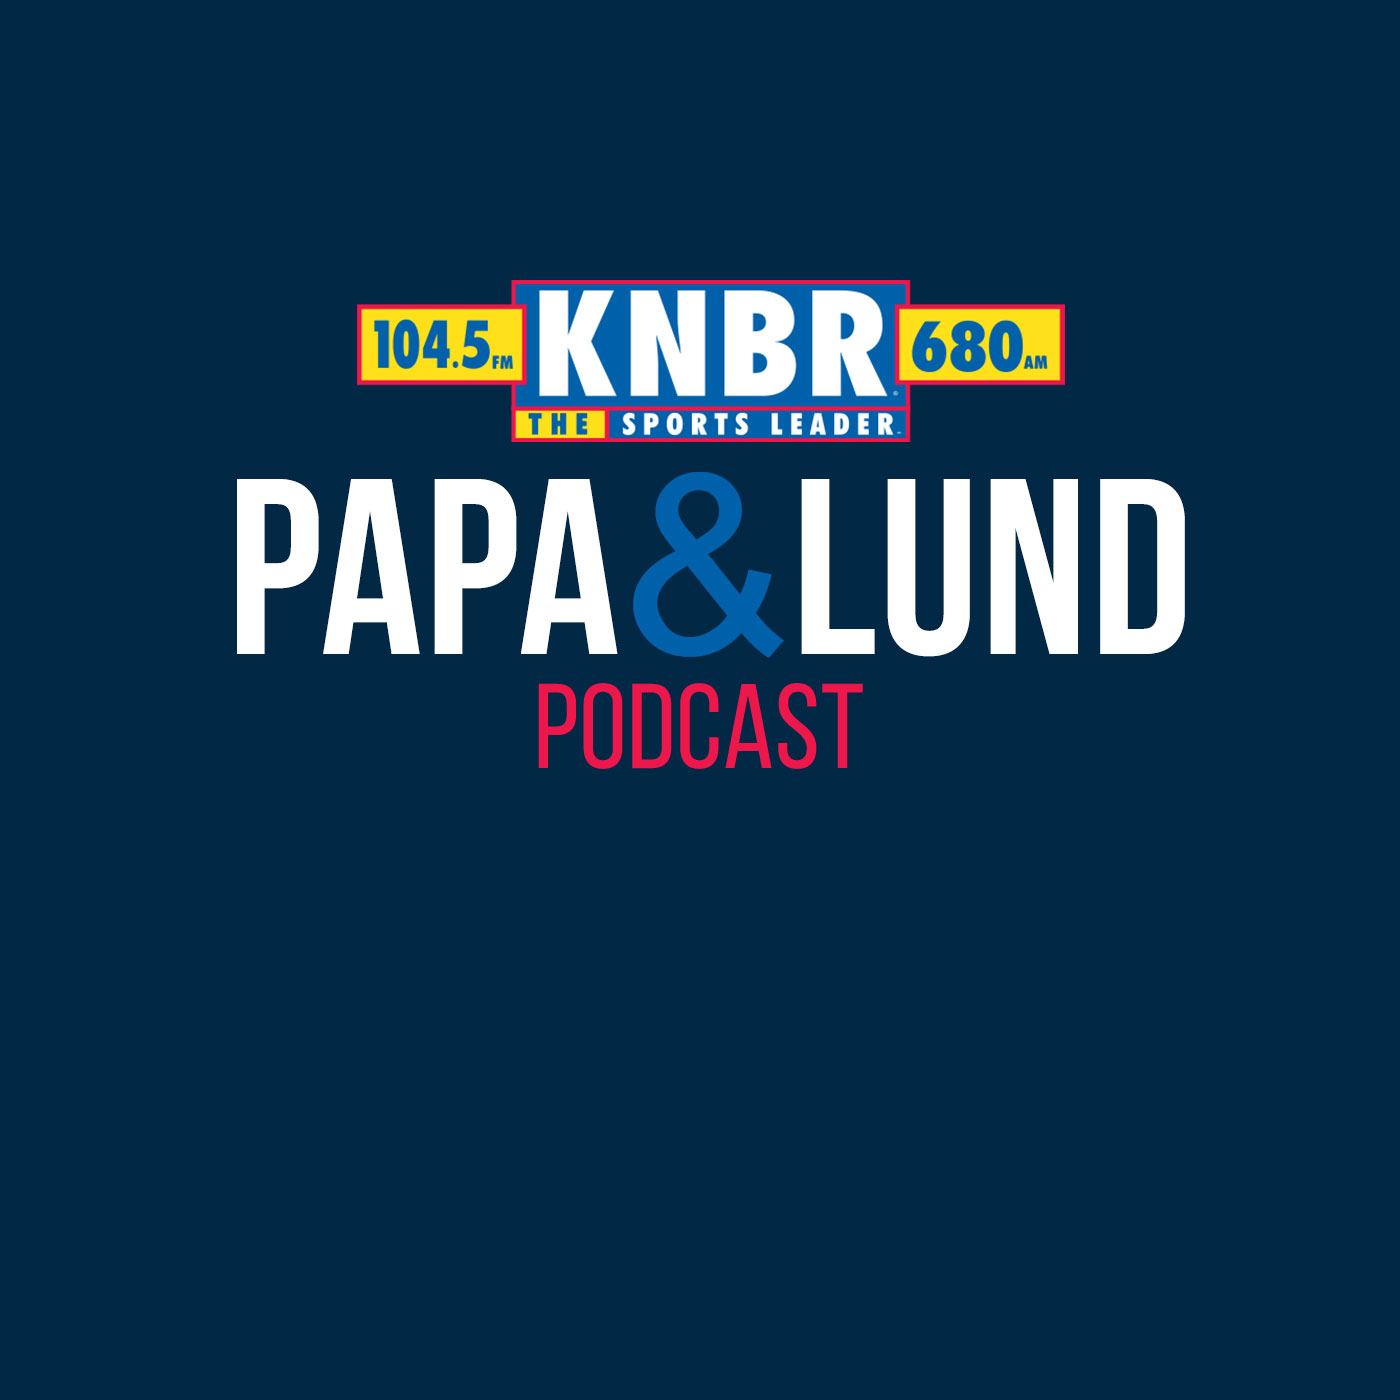 7-21 Hunter Pence joins Benz & Lund to discuss the comparisons of Bailey and Posey, and what the Giants might do as we near the Trade Deadline